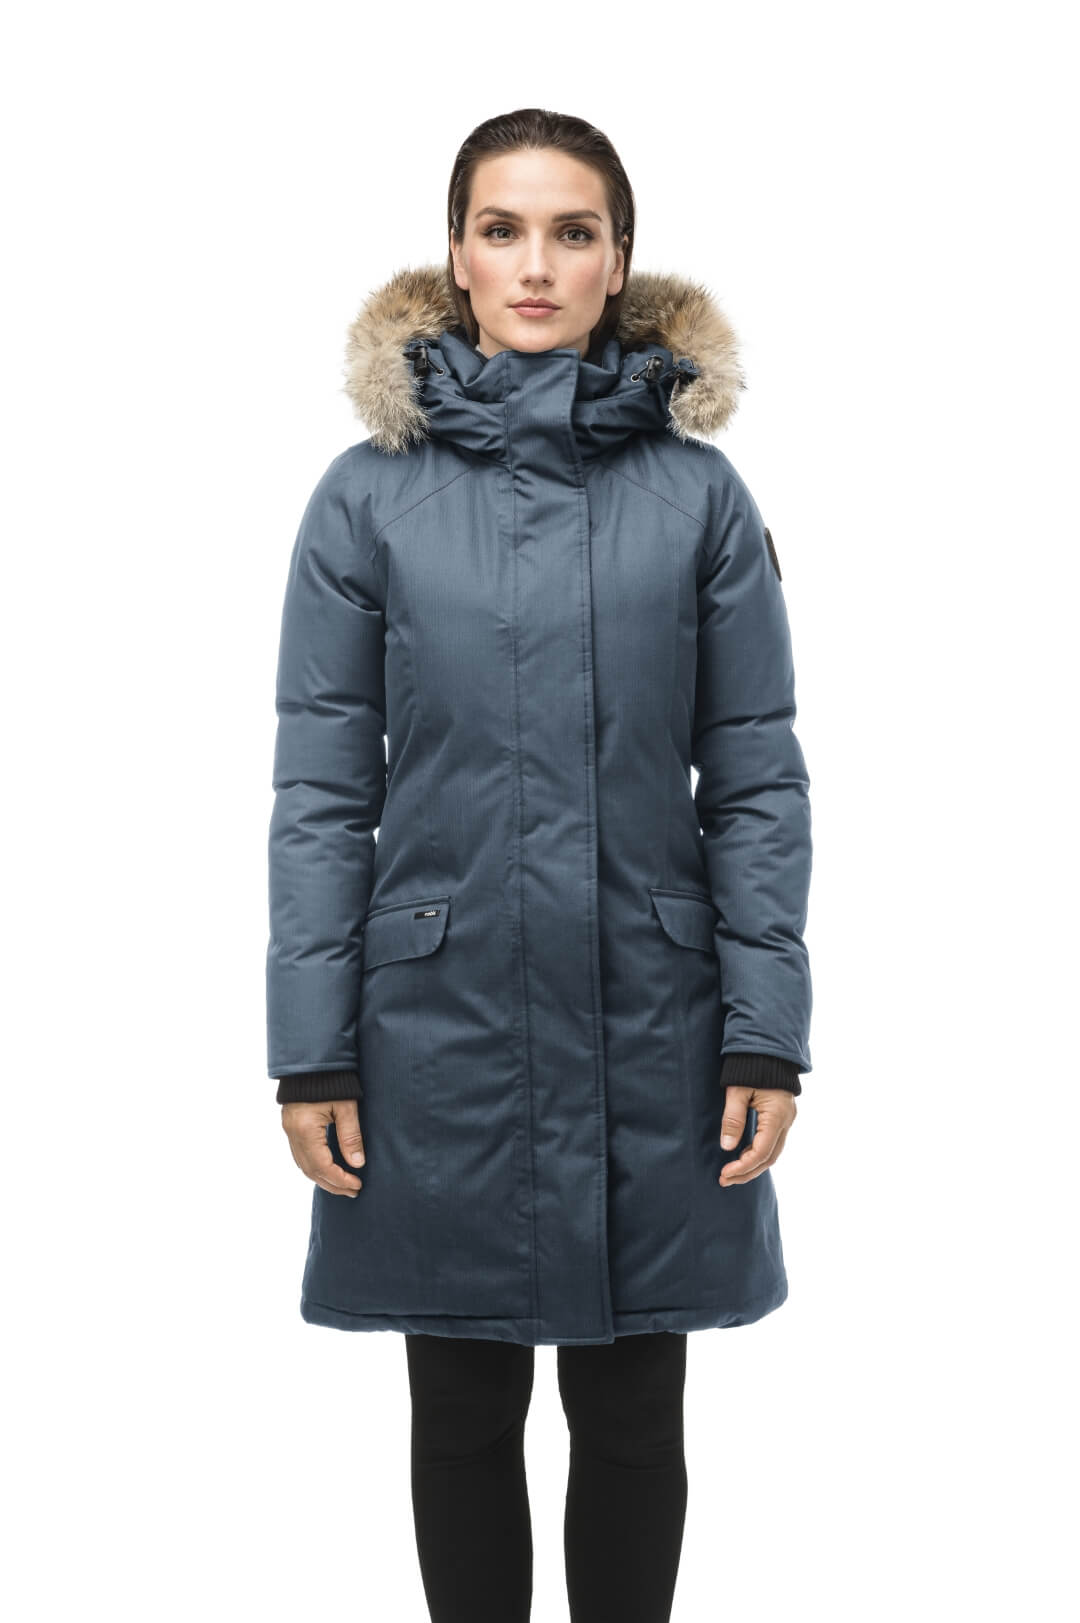 Rebecca Women's Parka in knee length, Canadian duck down insulation, two-way zipper with magnetic front placket, non-removable hood with removable coyote fur trim, in Balsam